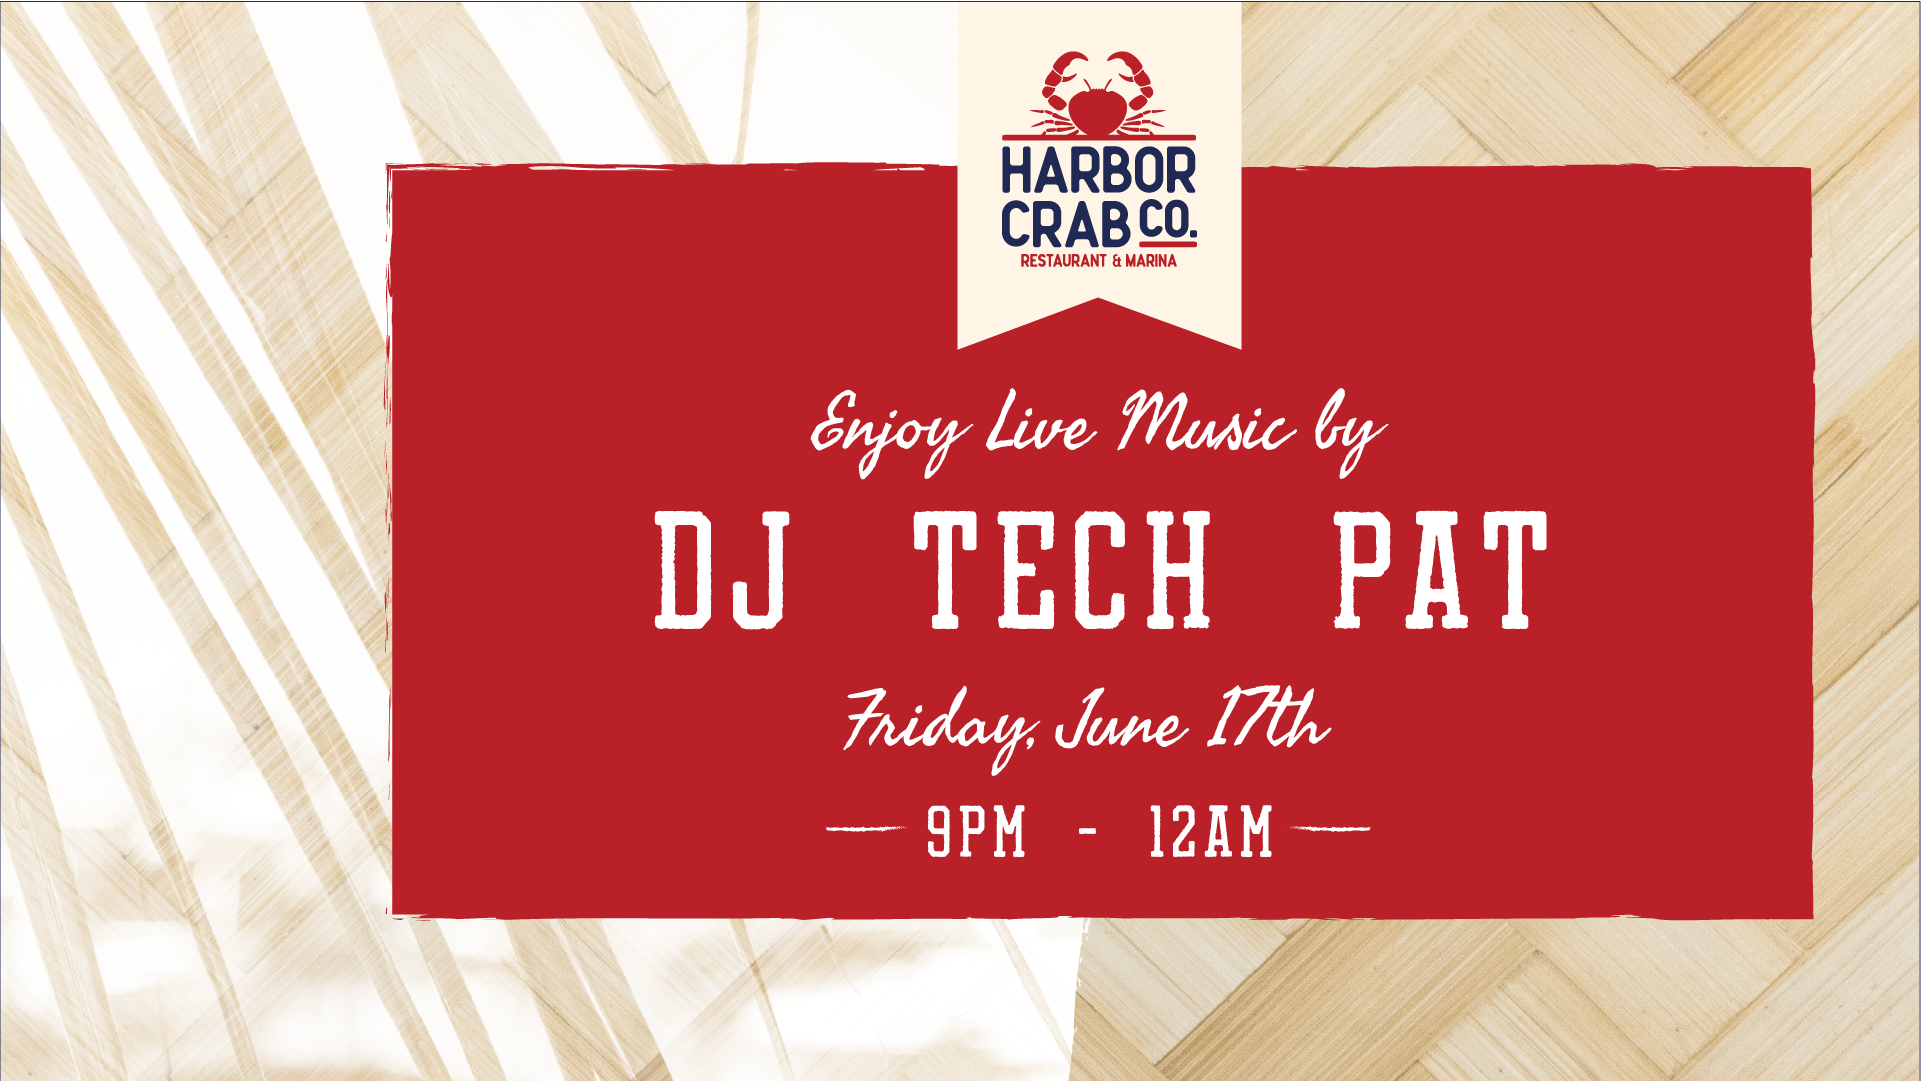 Flyer for DJ Tech Pat on Fri June 17th at 9pm